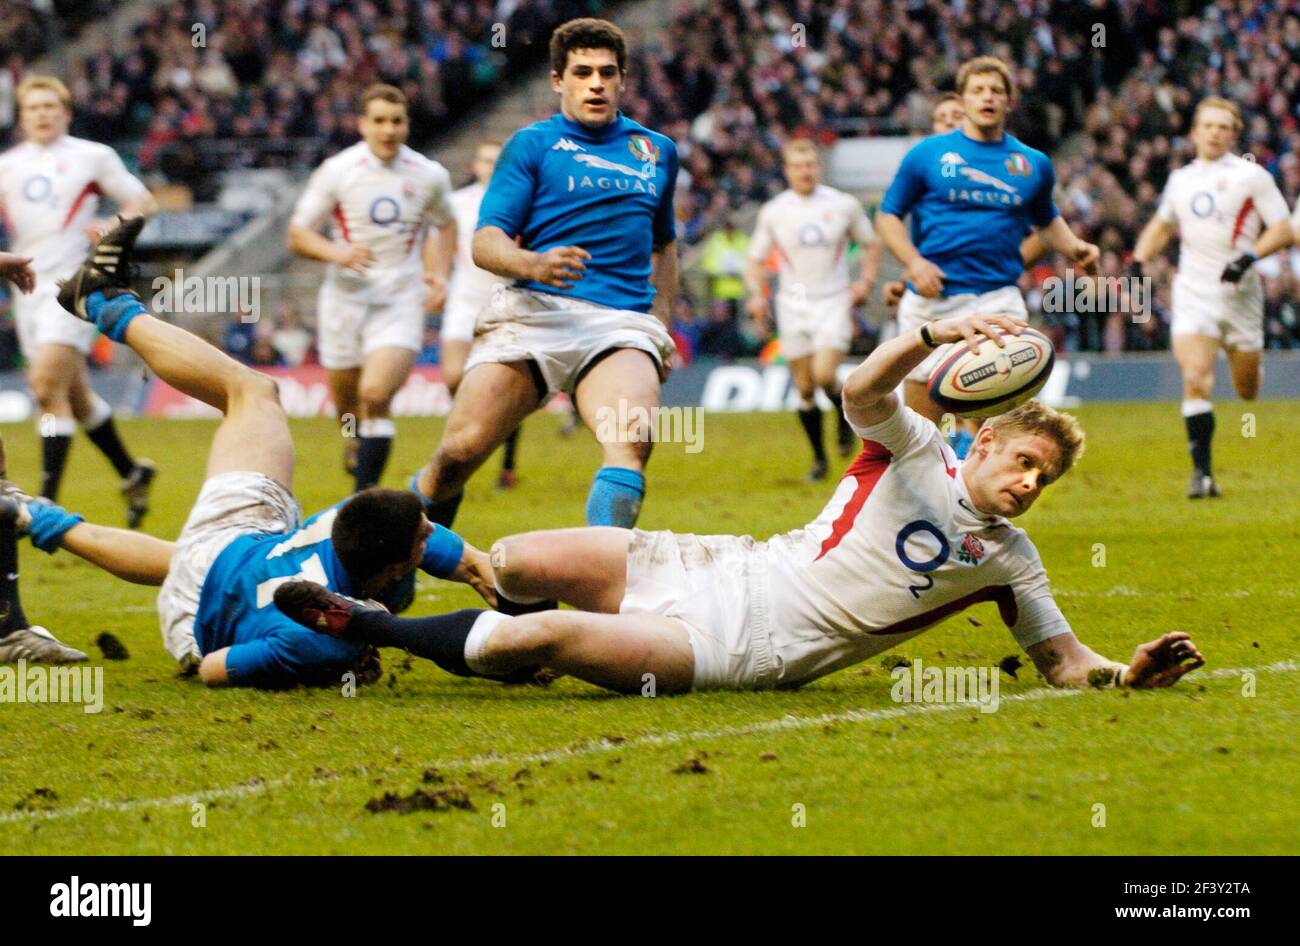 SIX NATIONS ENGLAND V ITALY IAIN BALSHAW ABOUT TO SCORE HIS TRY 12/3/3005  PICTURE DAVID ASHDOWN RUGBY ENGLAND Stock Photo